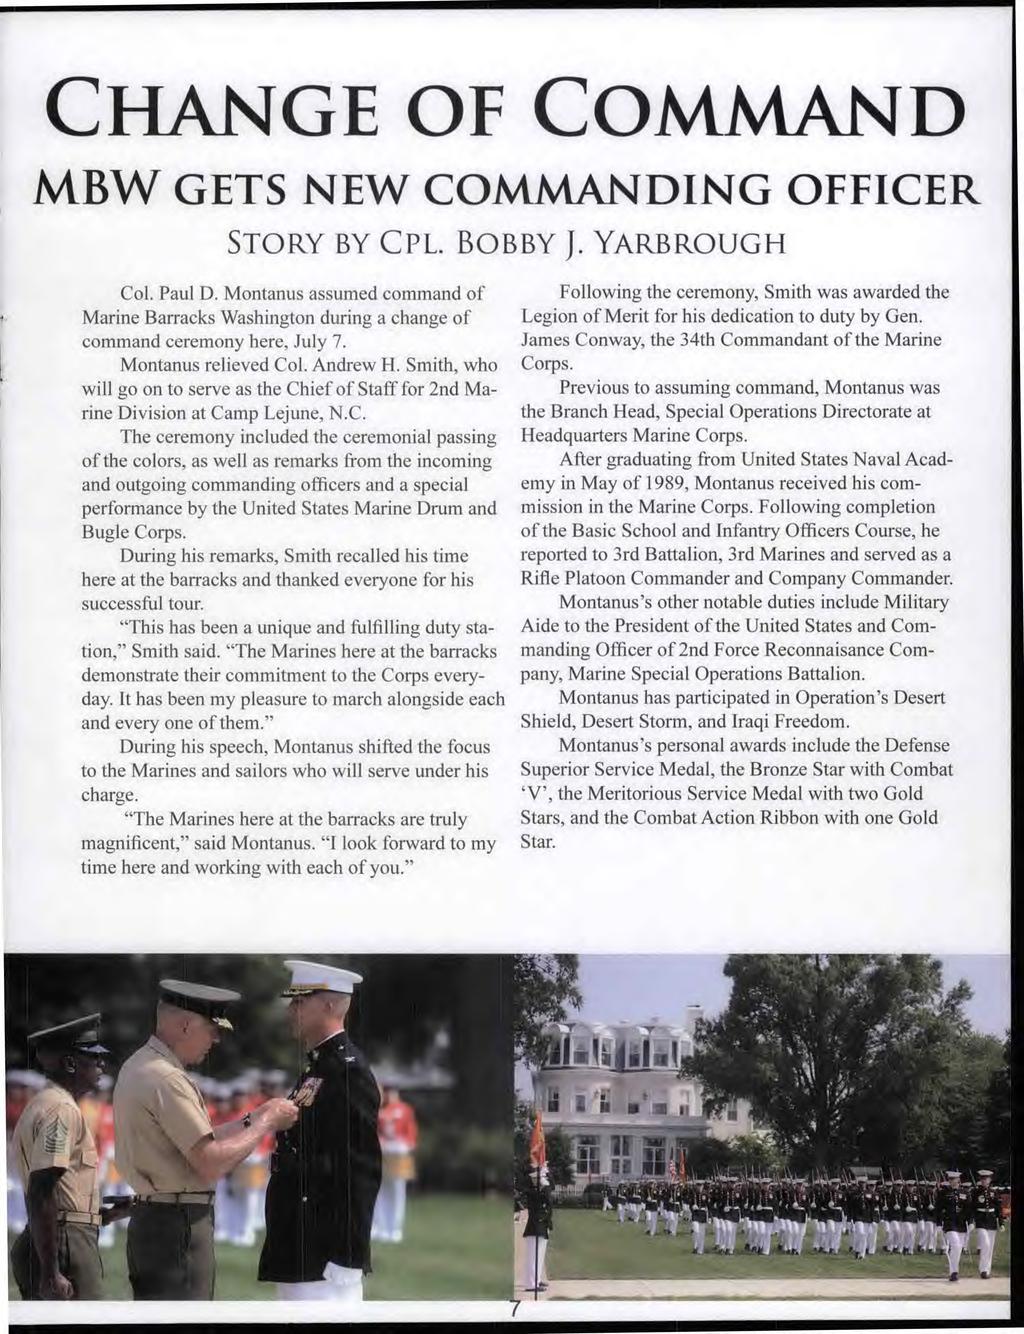 CHANGE OF COMMAND MBW GETS NEW COMMANDING OFFICER STORY BY CPL. BOBBY J. YARBROUGH Col. Paul D. Montanus assumed command of Marine Barracks Washington during a change of command ceremony here July 7.